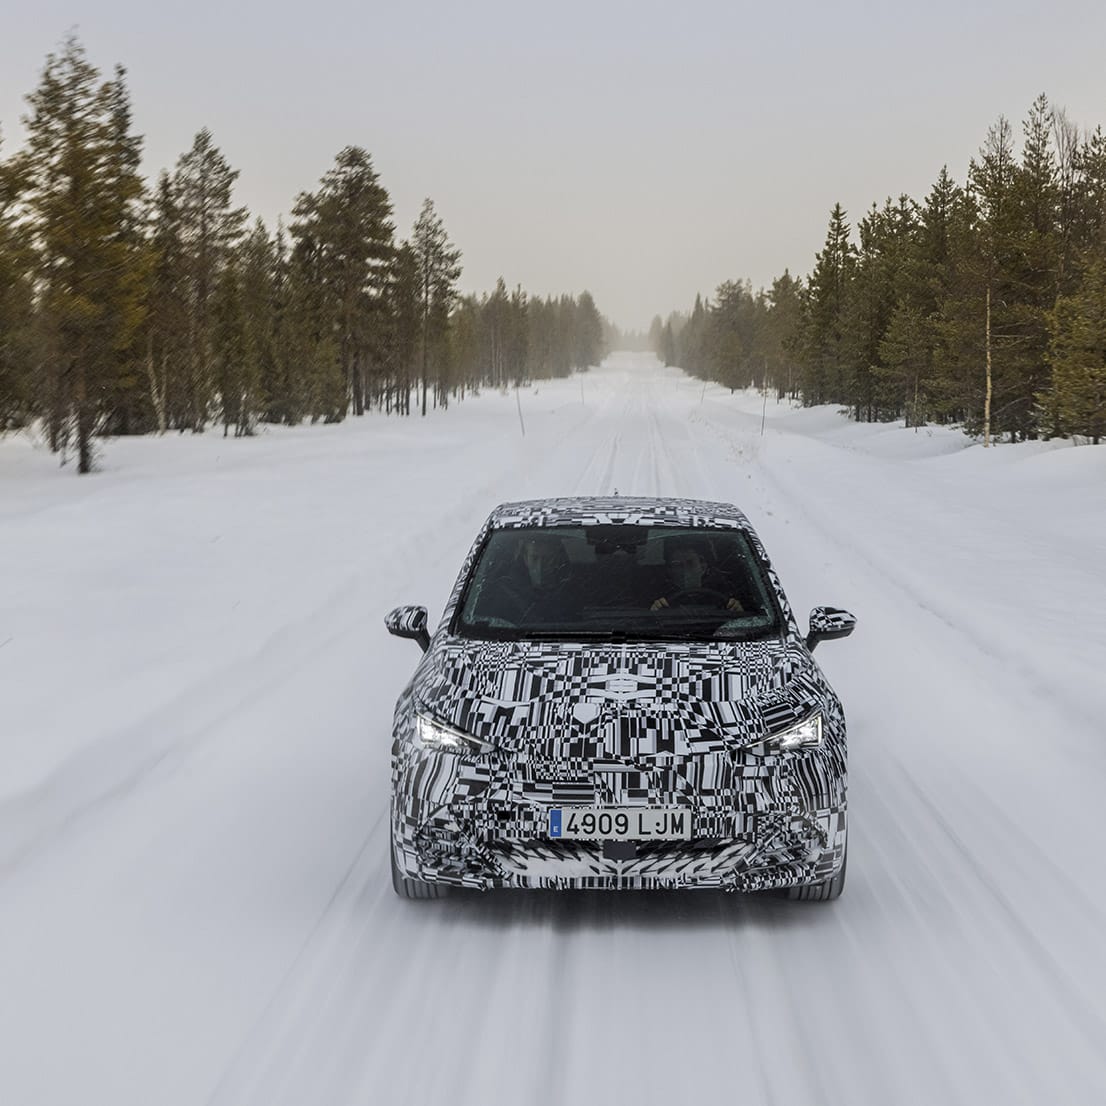 A CUPRA Born doing a winter test on a snow-covered road